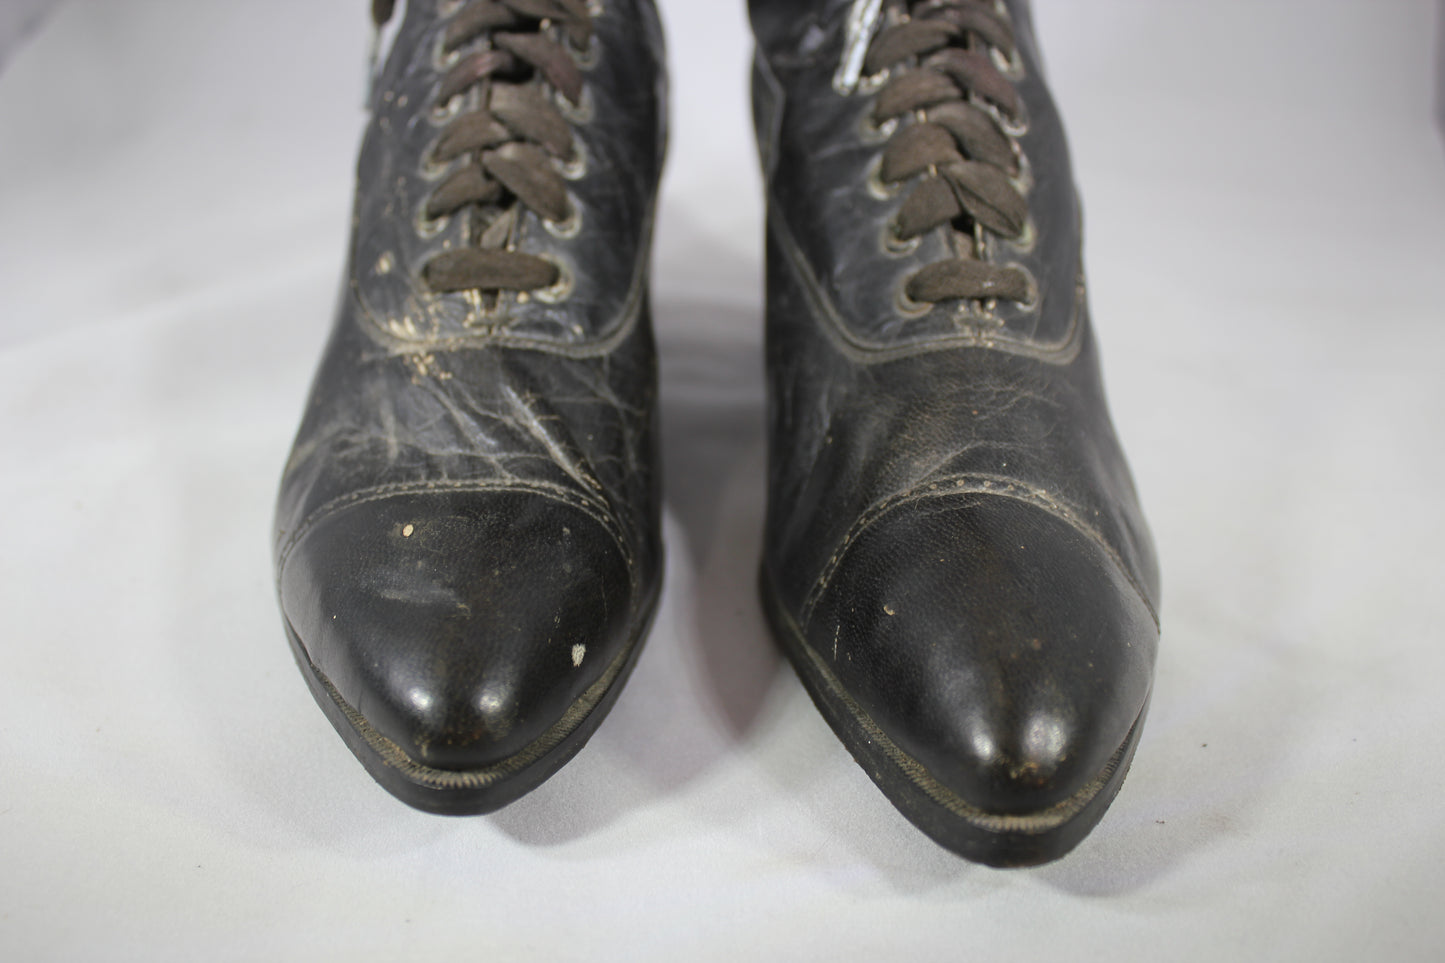 Victorian Lace-Up Black Leather Women's Boots, High-Top Shoes, by Hamilton Brown Shoe Co.